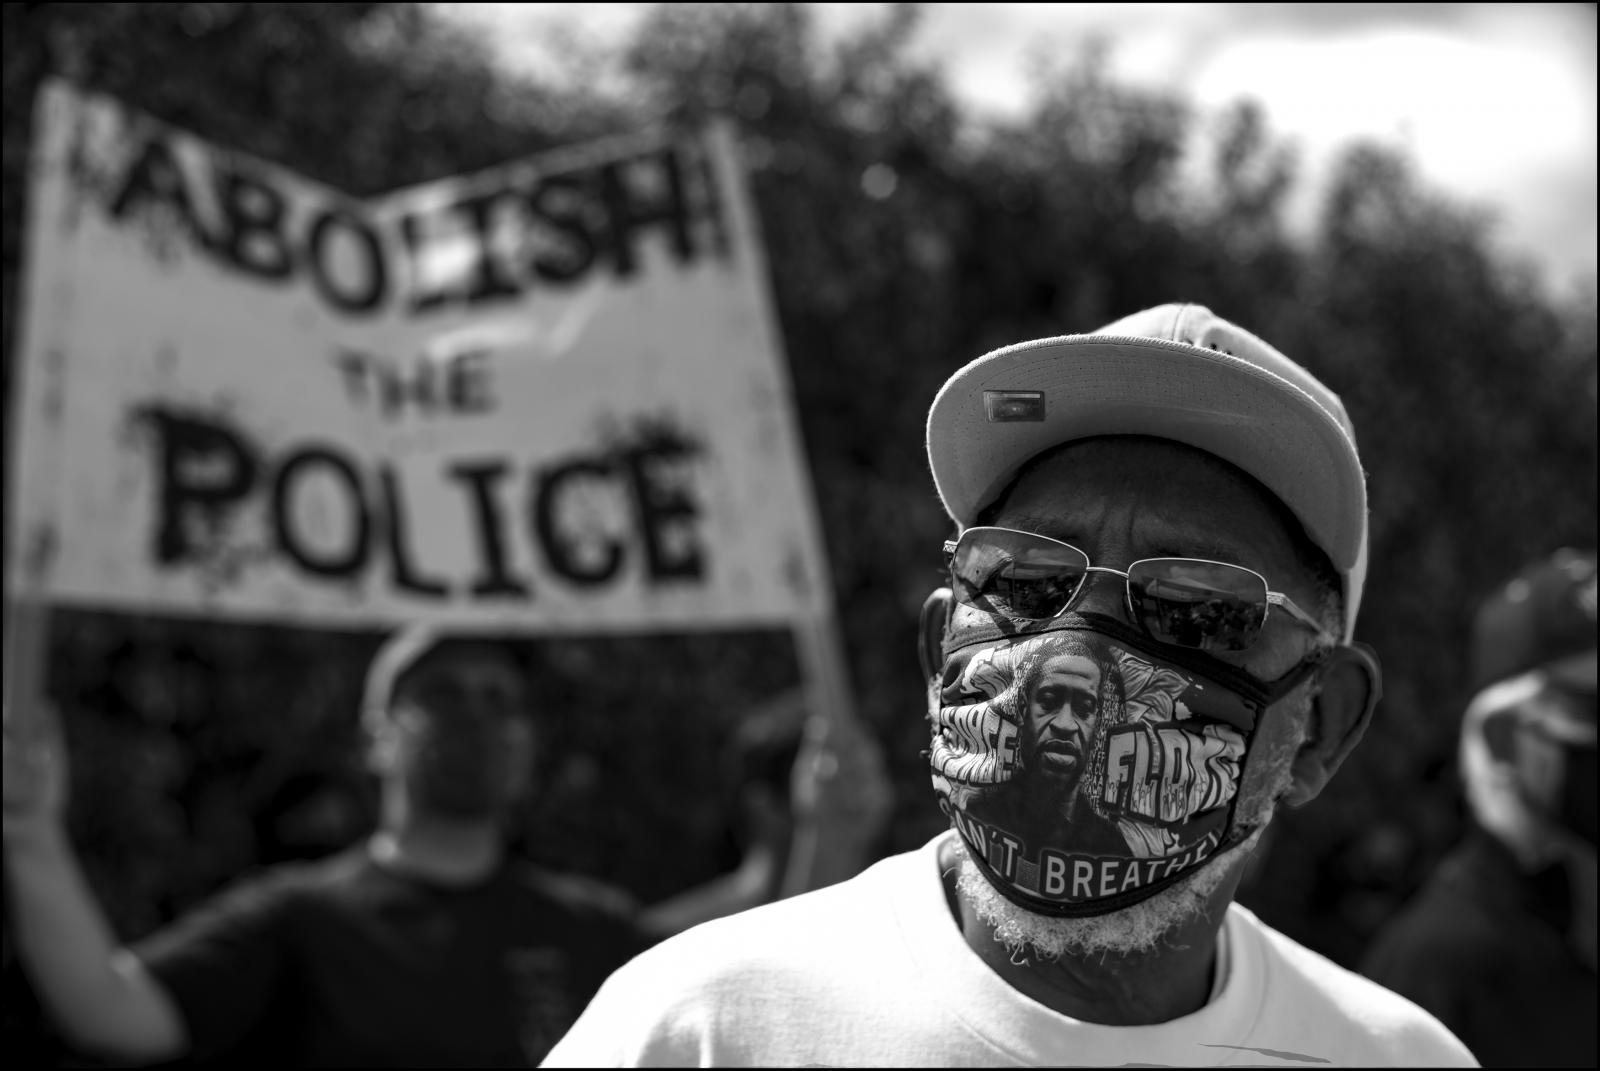 Thumbnail of Elderly protestor, face covered _area of Los Angeles, 06/06/2020.